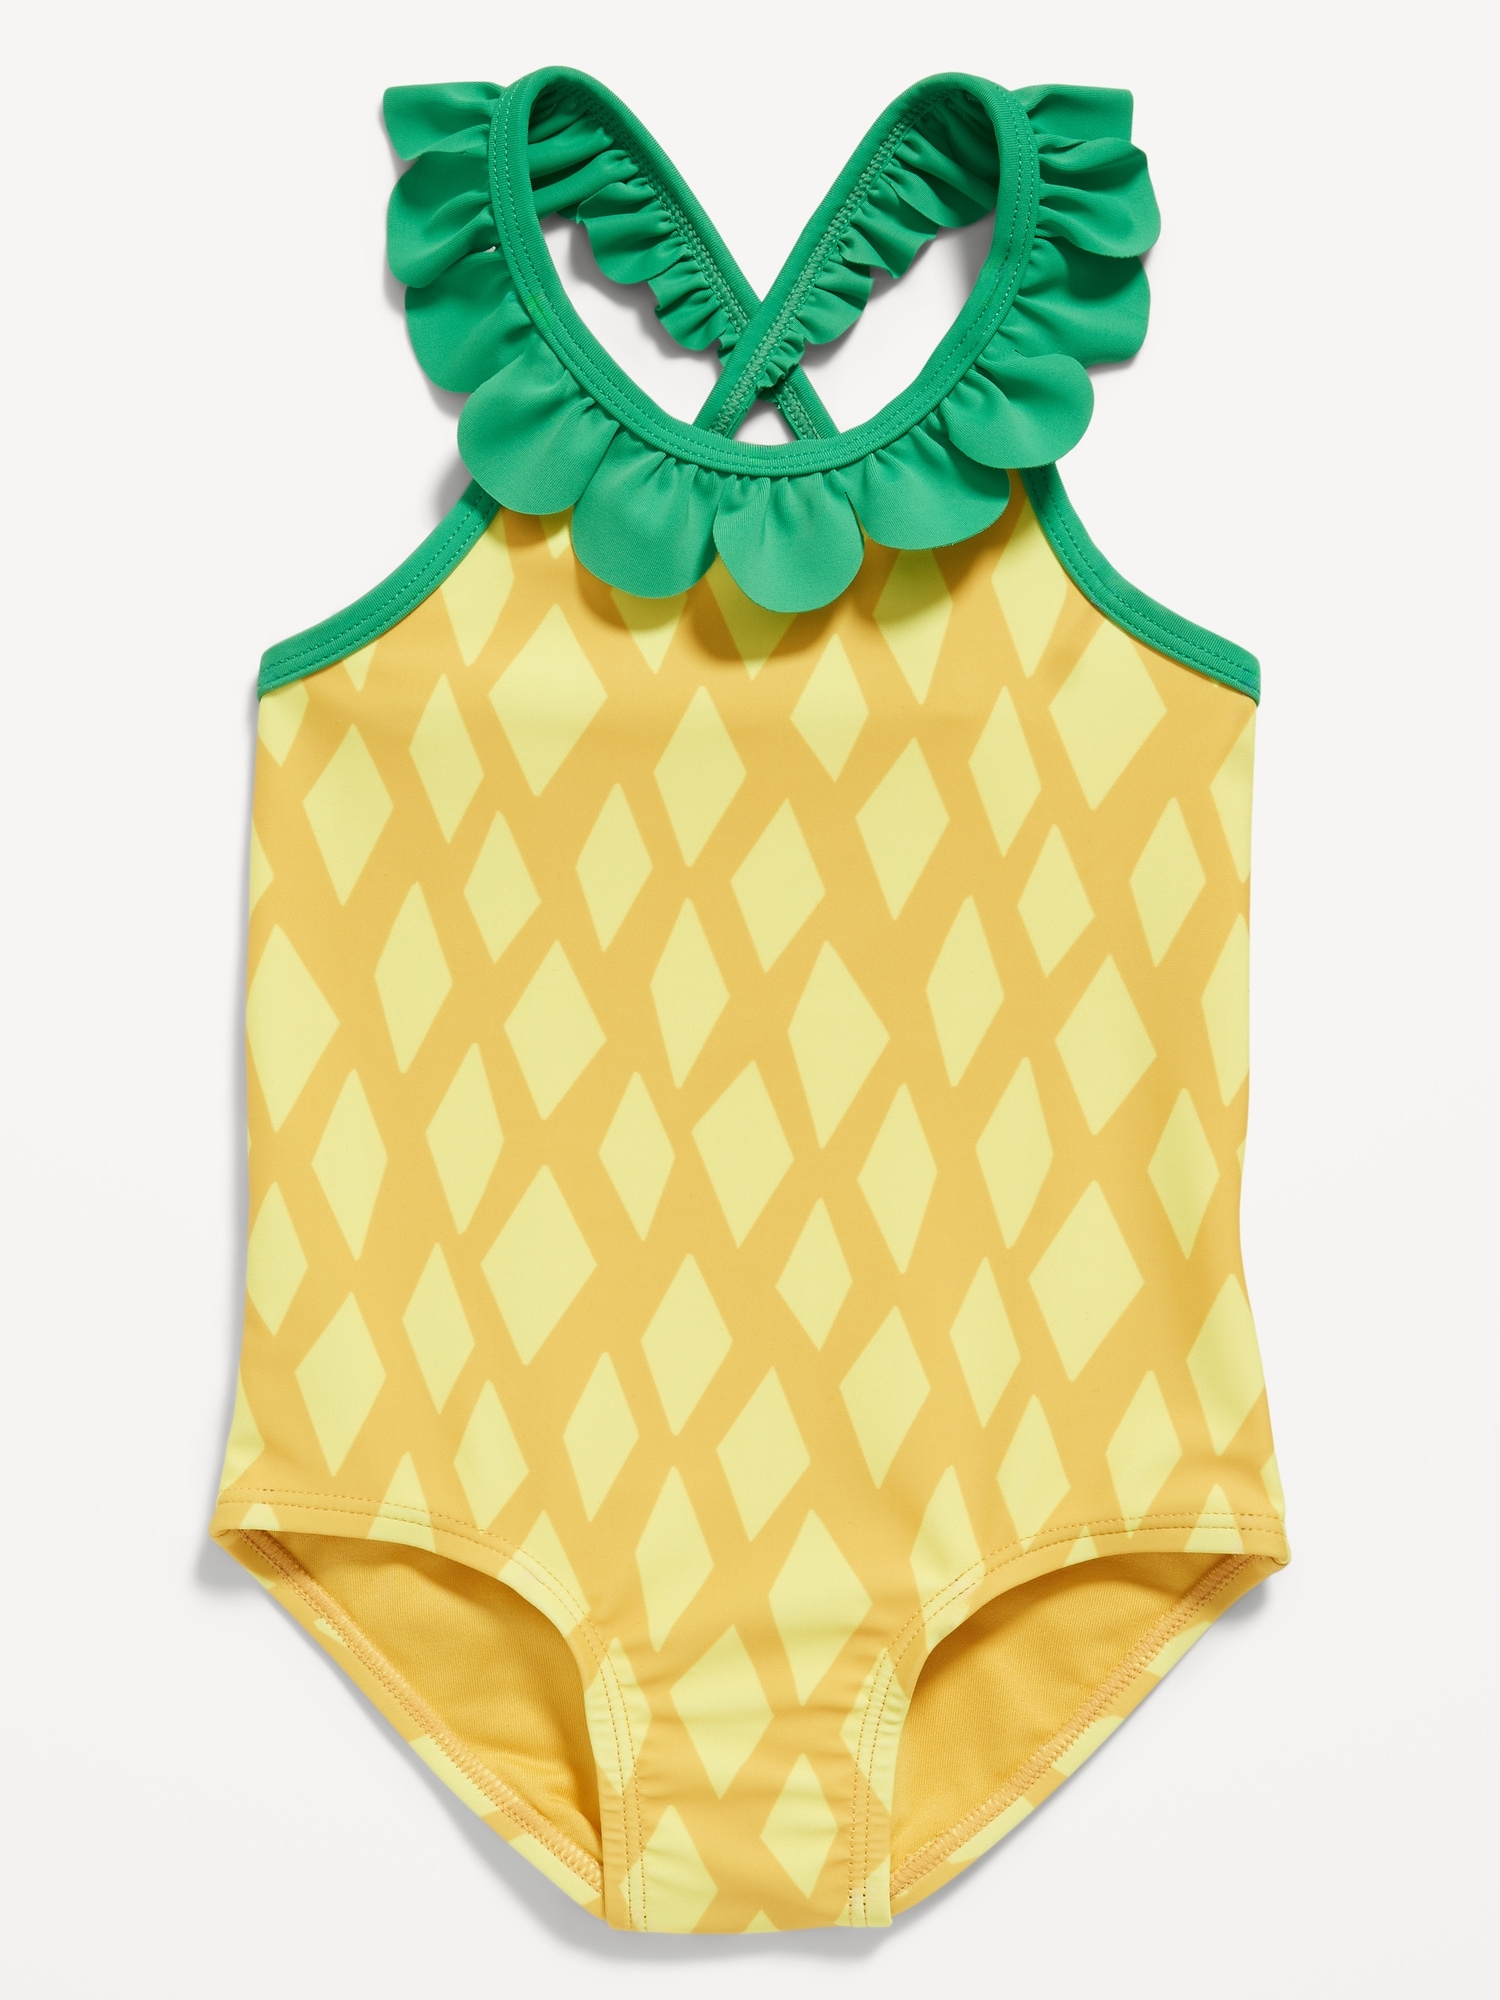 Printed Swimsuit for Toddler Girls Hot Deal